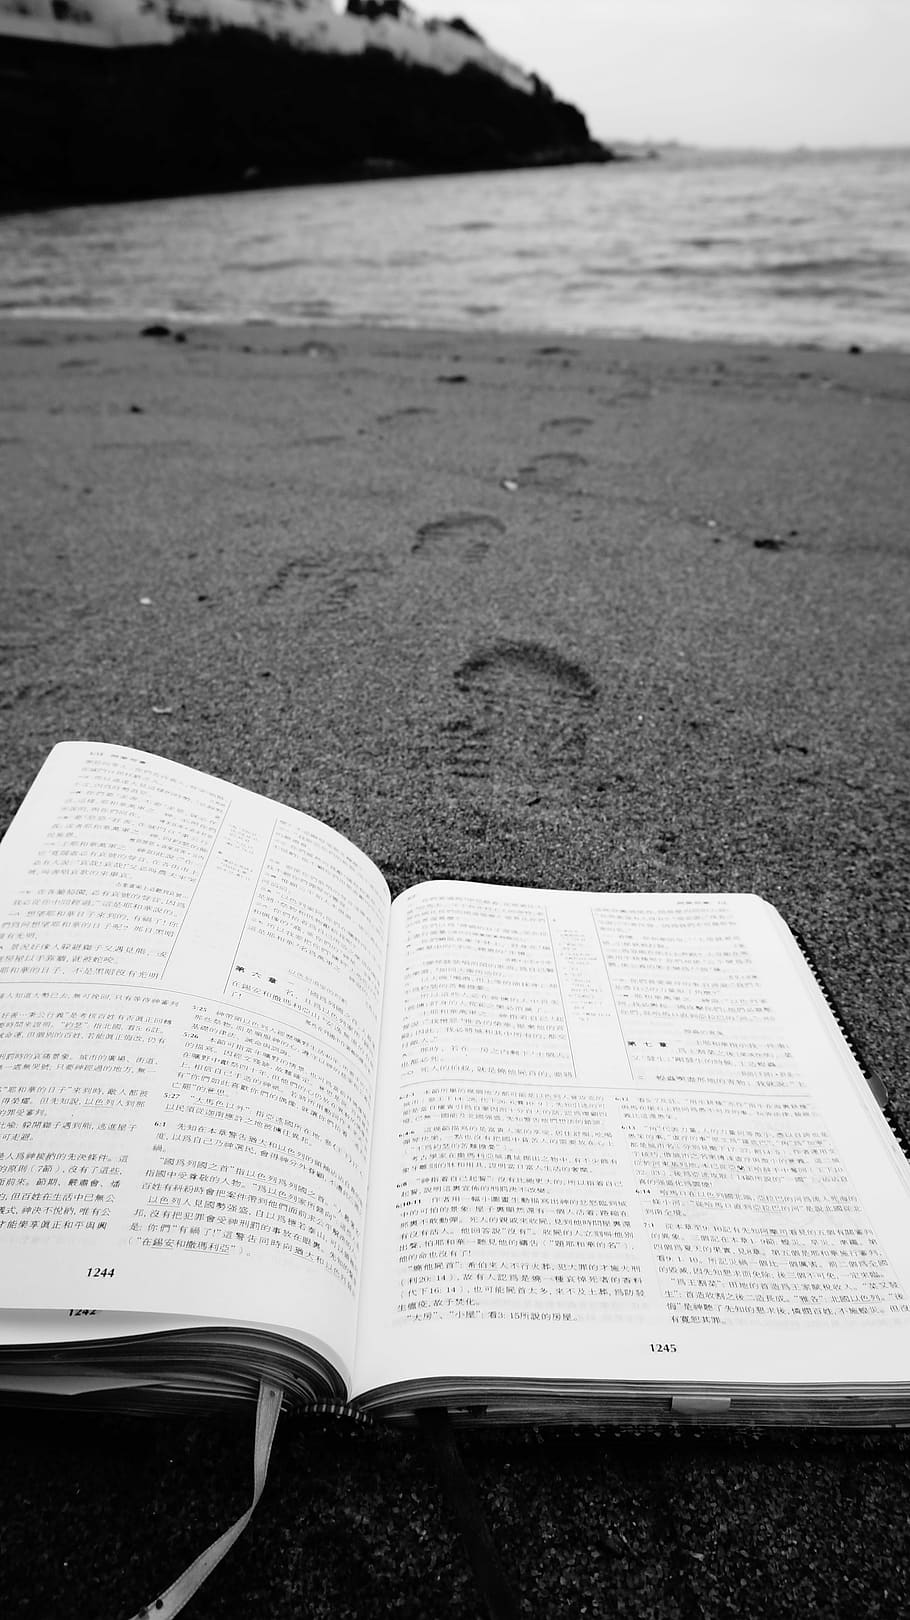 sand, beach, outdoors, footprints, sea, bible, peaceful, relaxation, black and white, christian